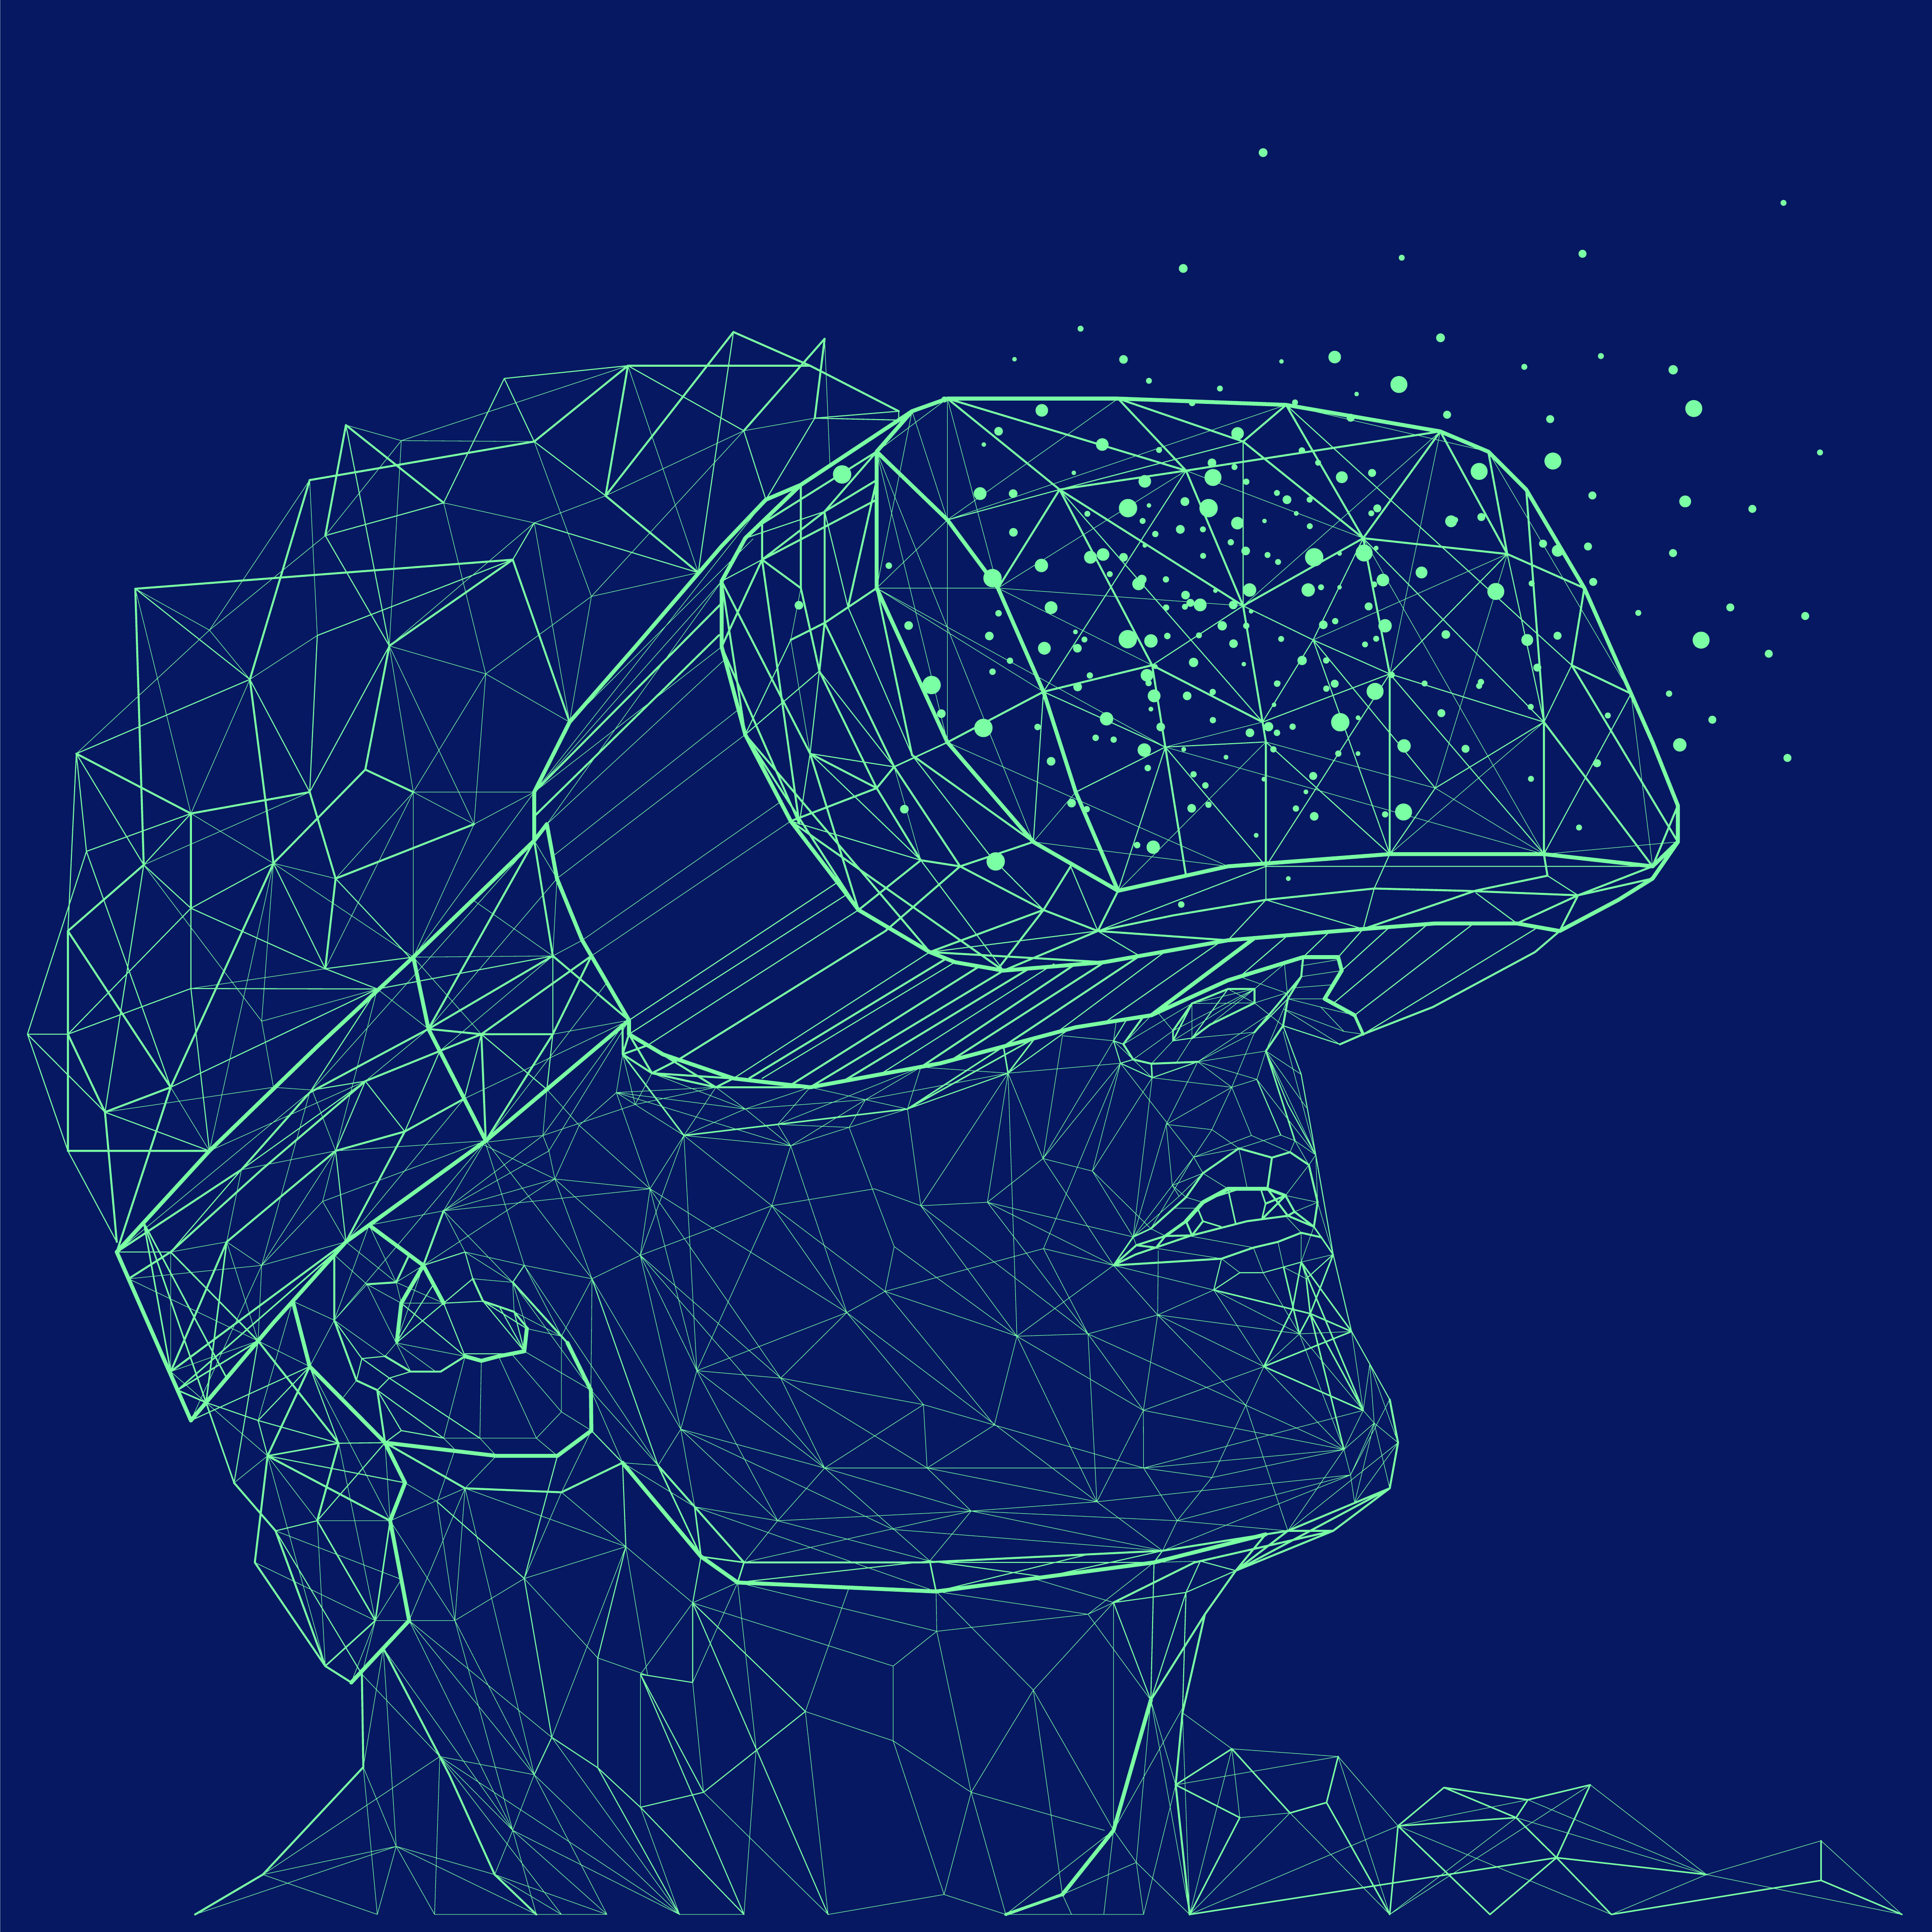 Illustration of person using VR goggles with teal dots against a blue background